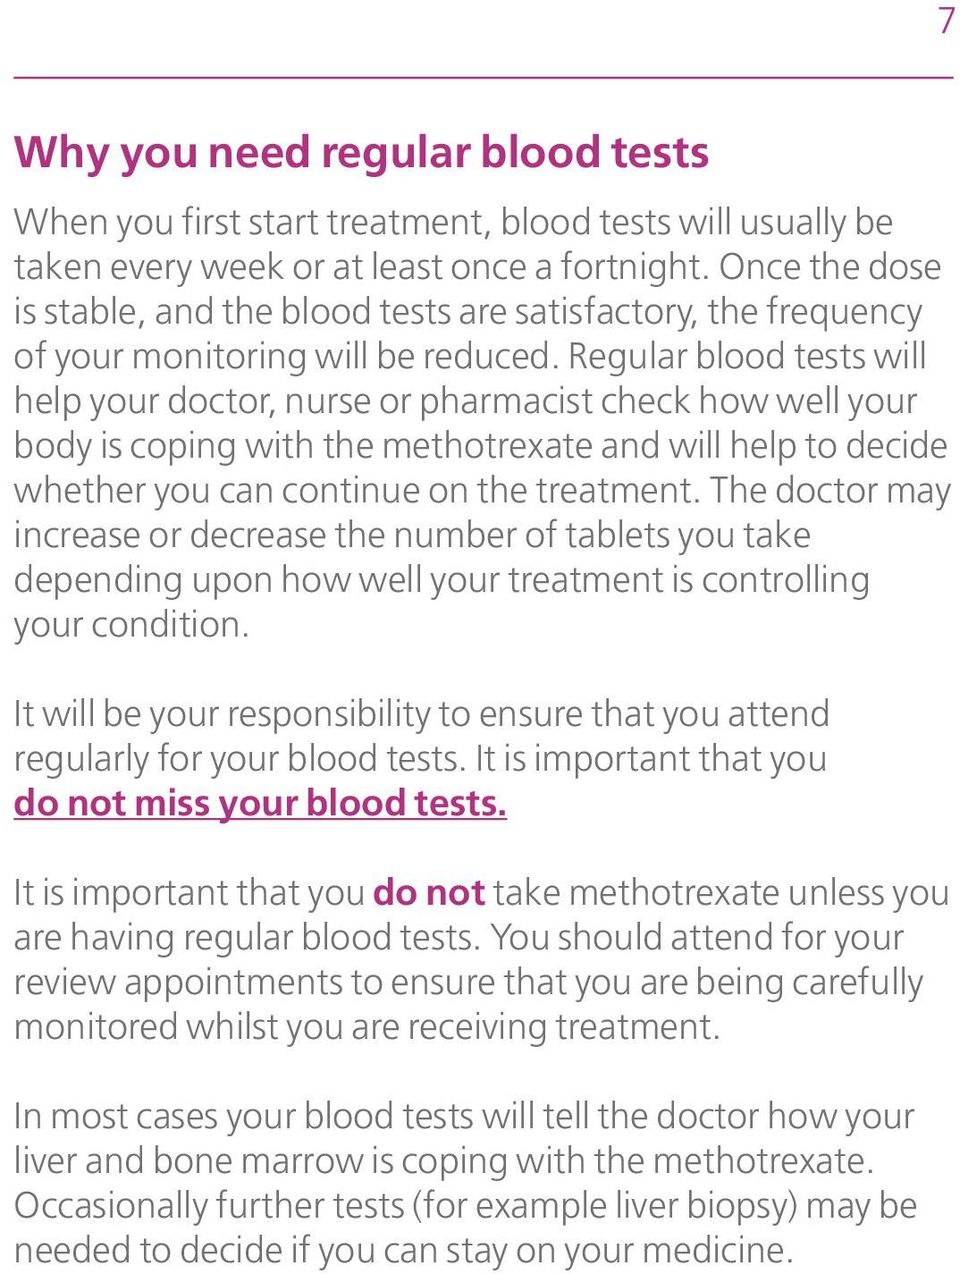 Regular blood tests will help your doctor, nurse or pharmacist check how well your body is coping with the methotrexate and will help to decide whether you can continue on the treatment.